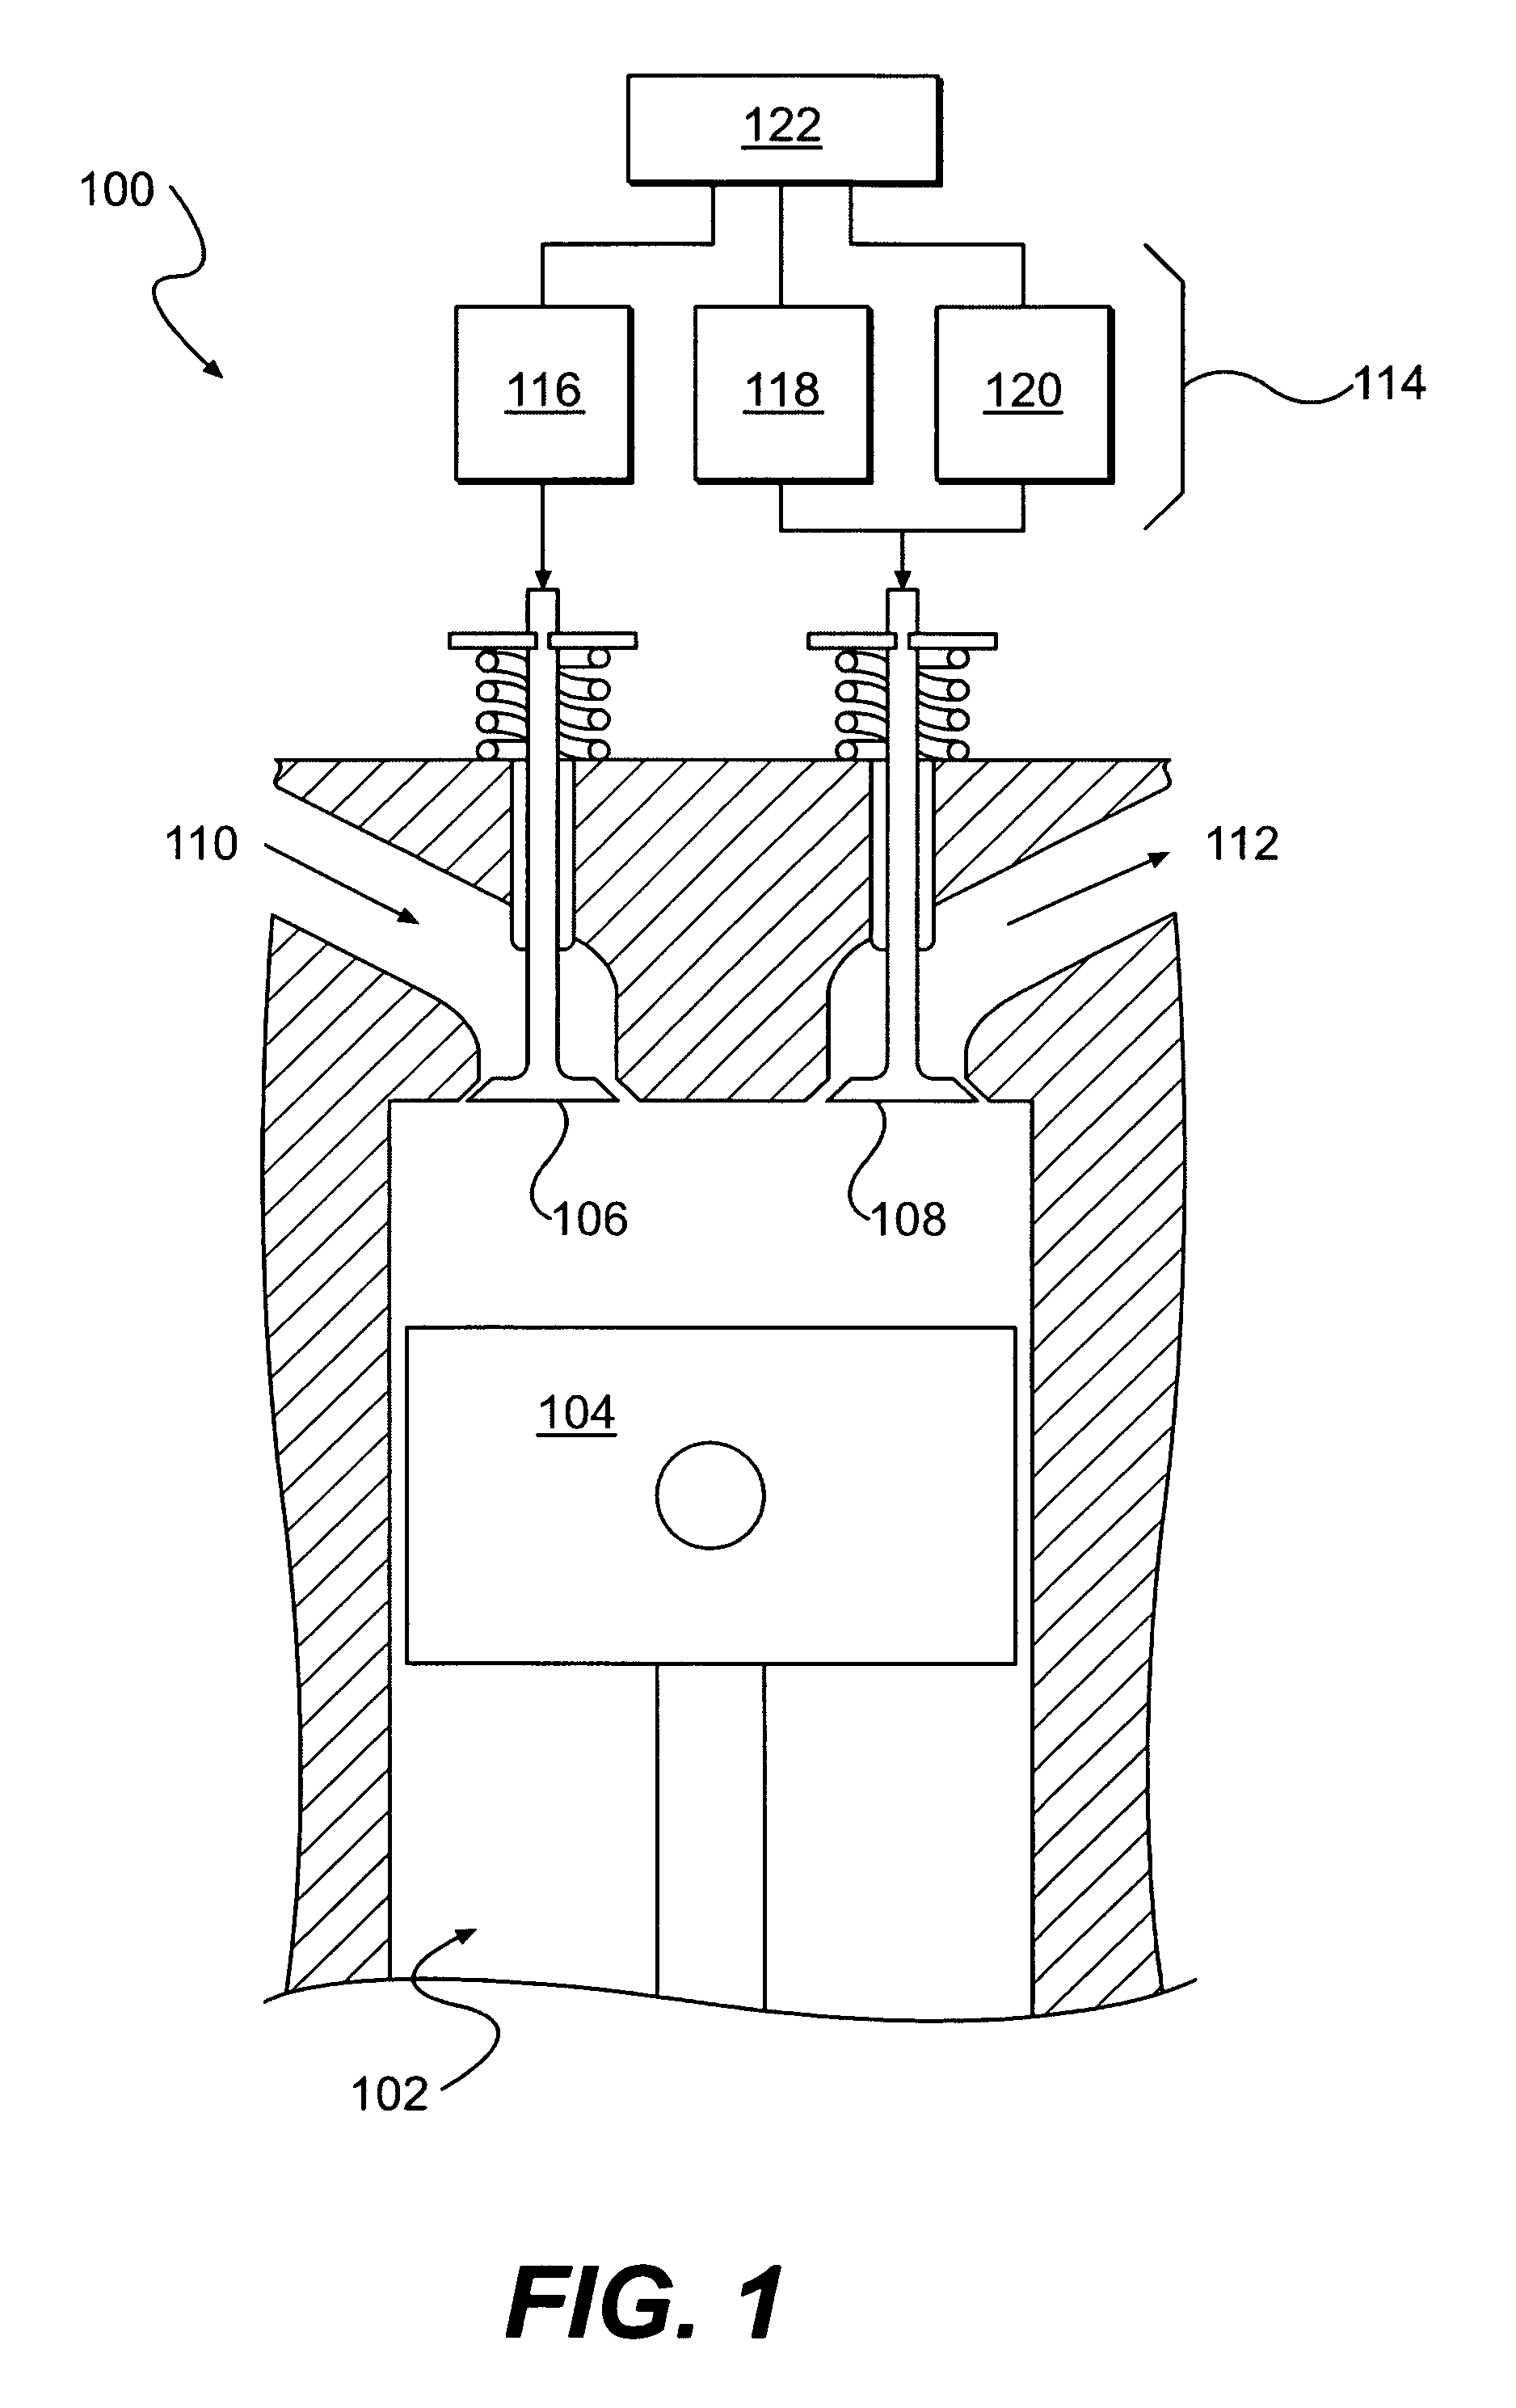 Method for variable valve actuation to provide positive power and engine braking